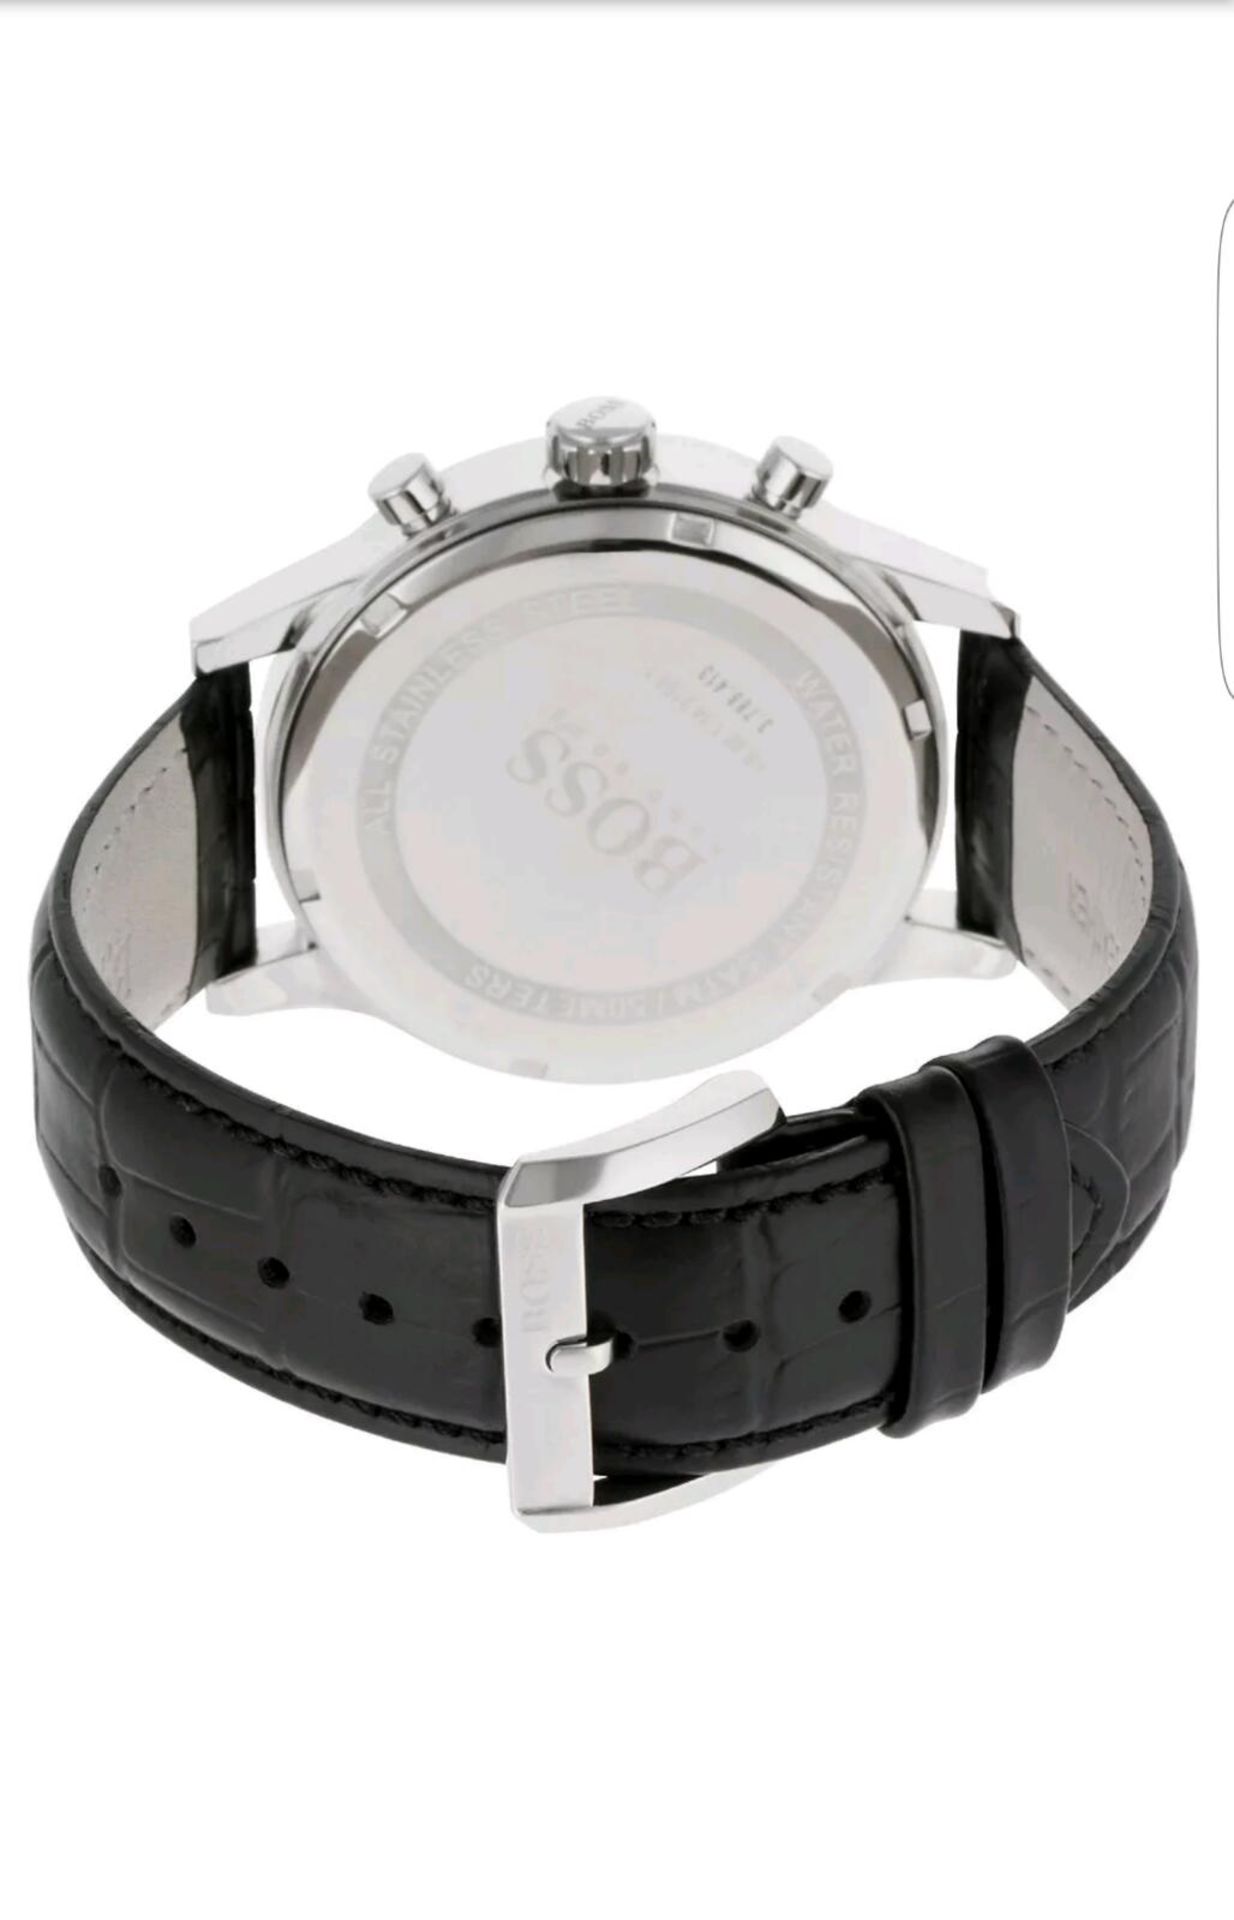 BRAND NEW HUGO BOSS 1512448, GENTS DESIGNER WATCH, COMPLETE WITH ORIGINAL BOX AND MANUAL - RRP £499 - Image 2 of 2